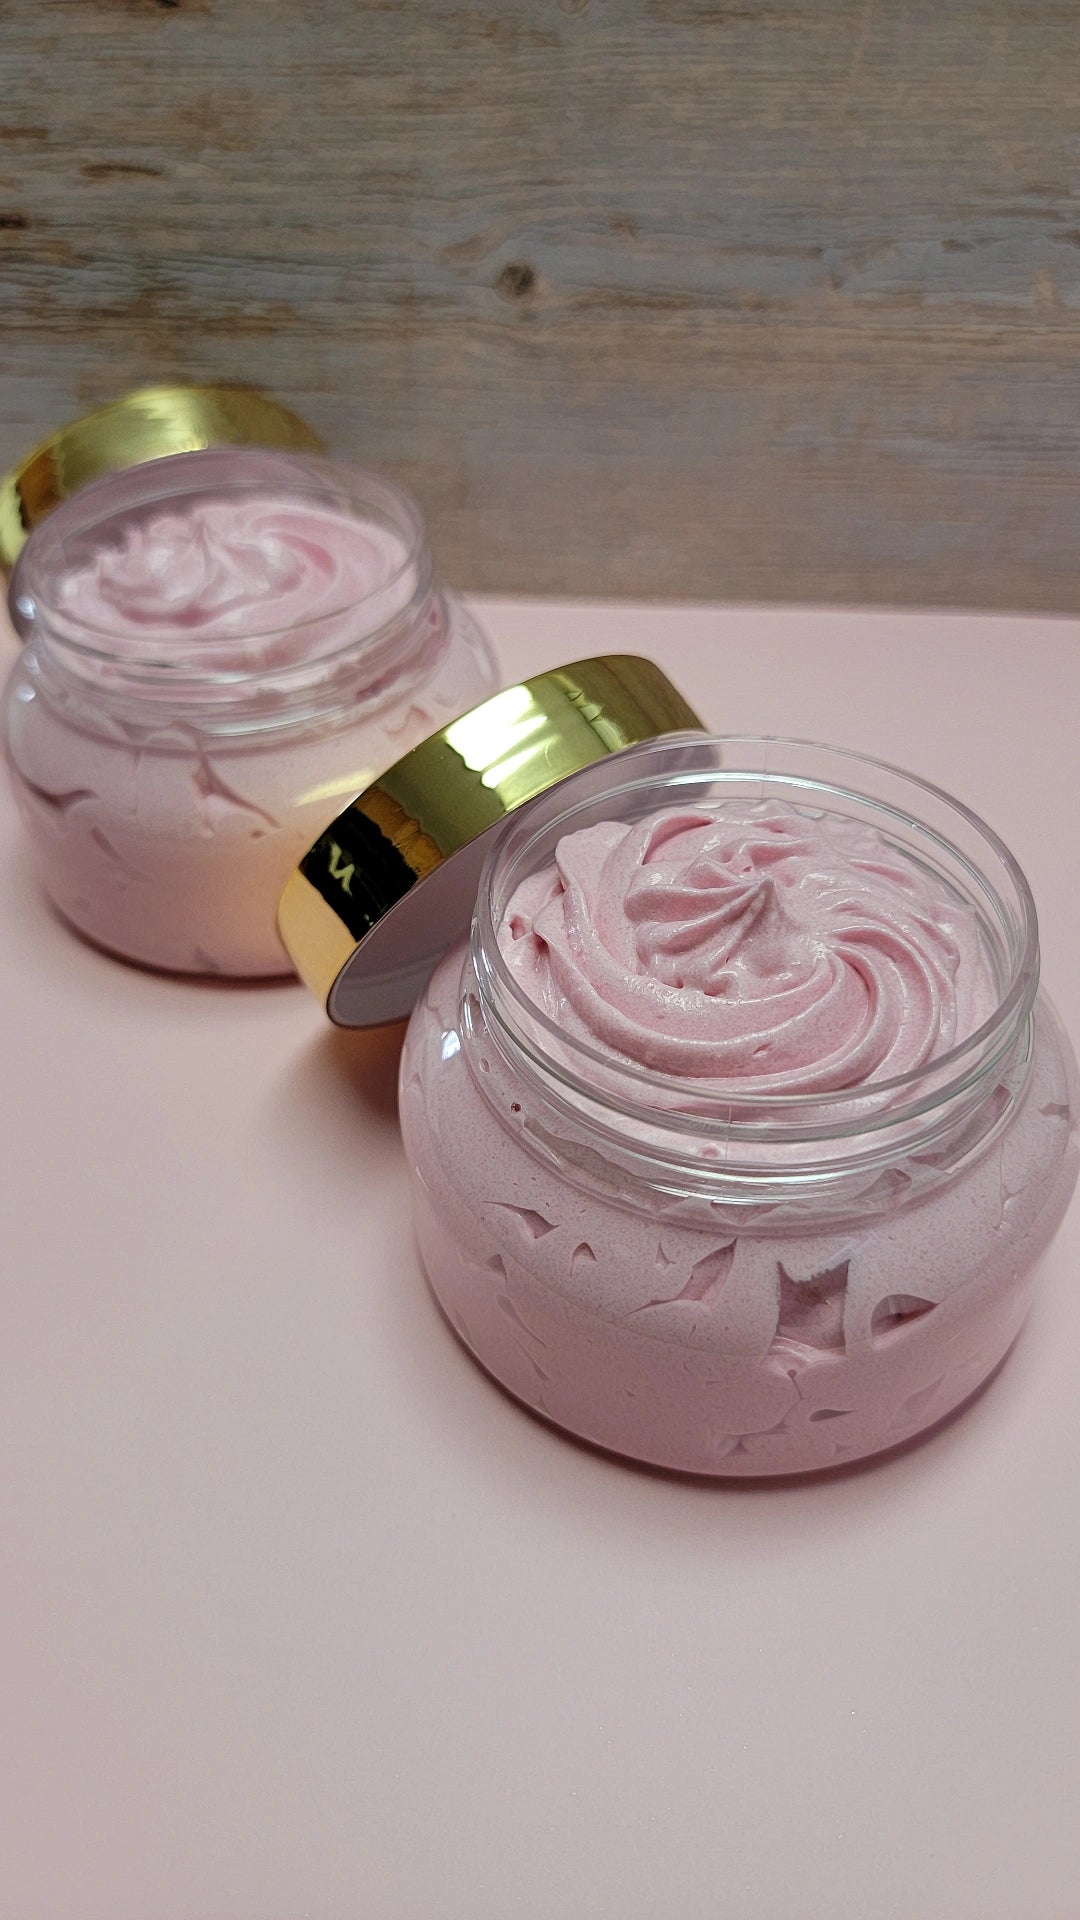 "Bubble Gum" Whipped Body Butter!